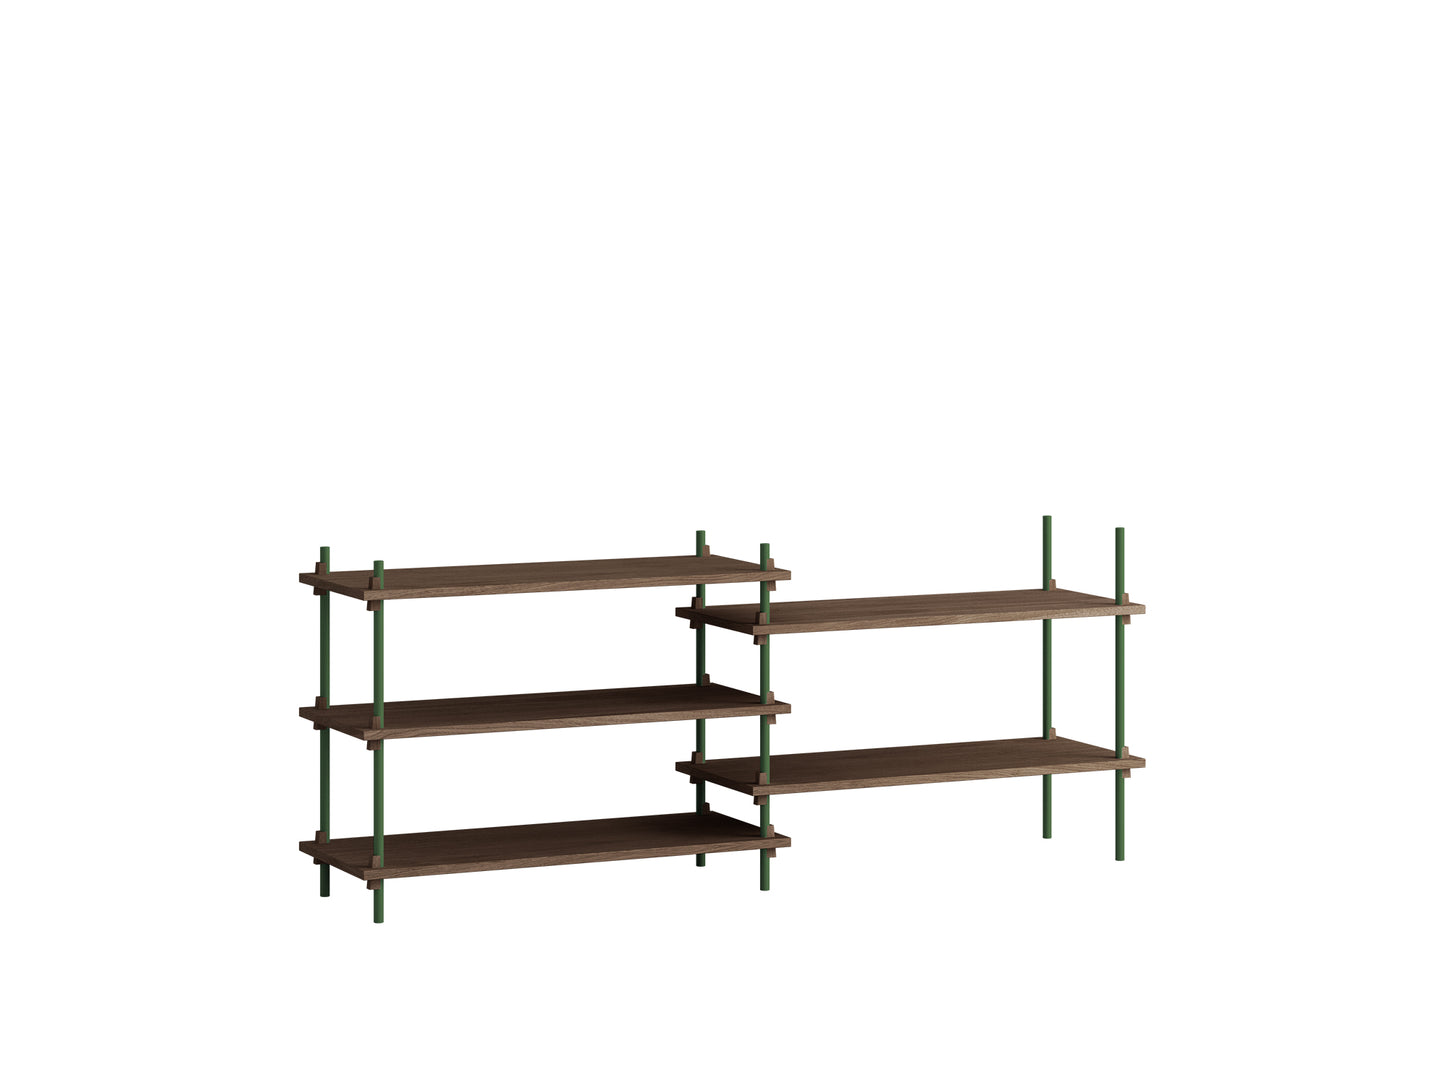 Moebe Shelving System - S.65.2.A Set in Pine Green / Smoked Oak